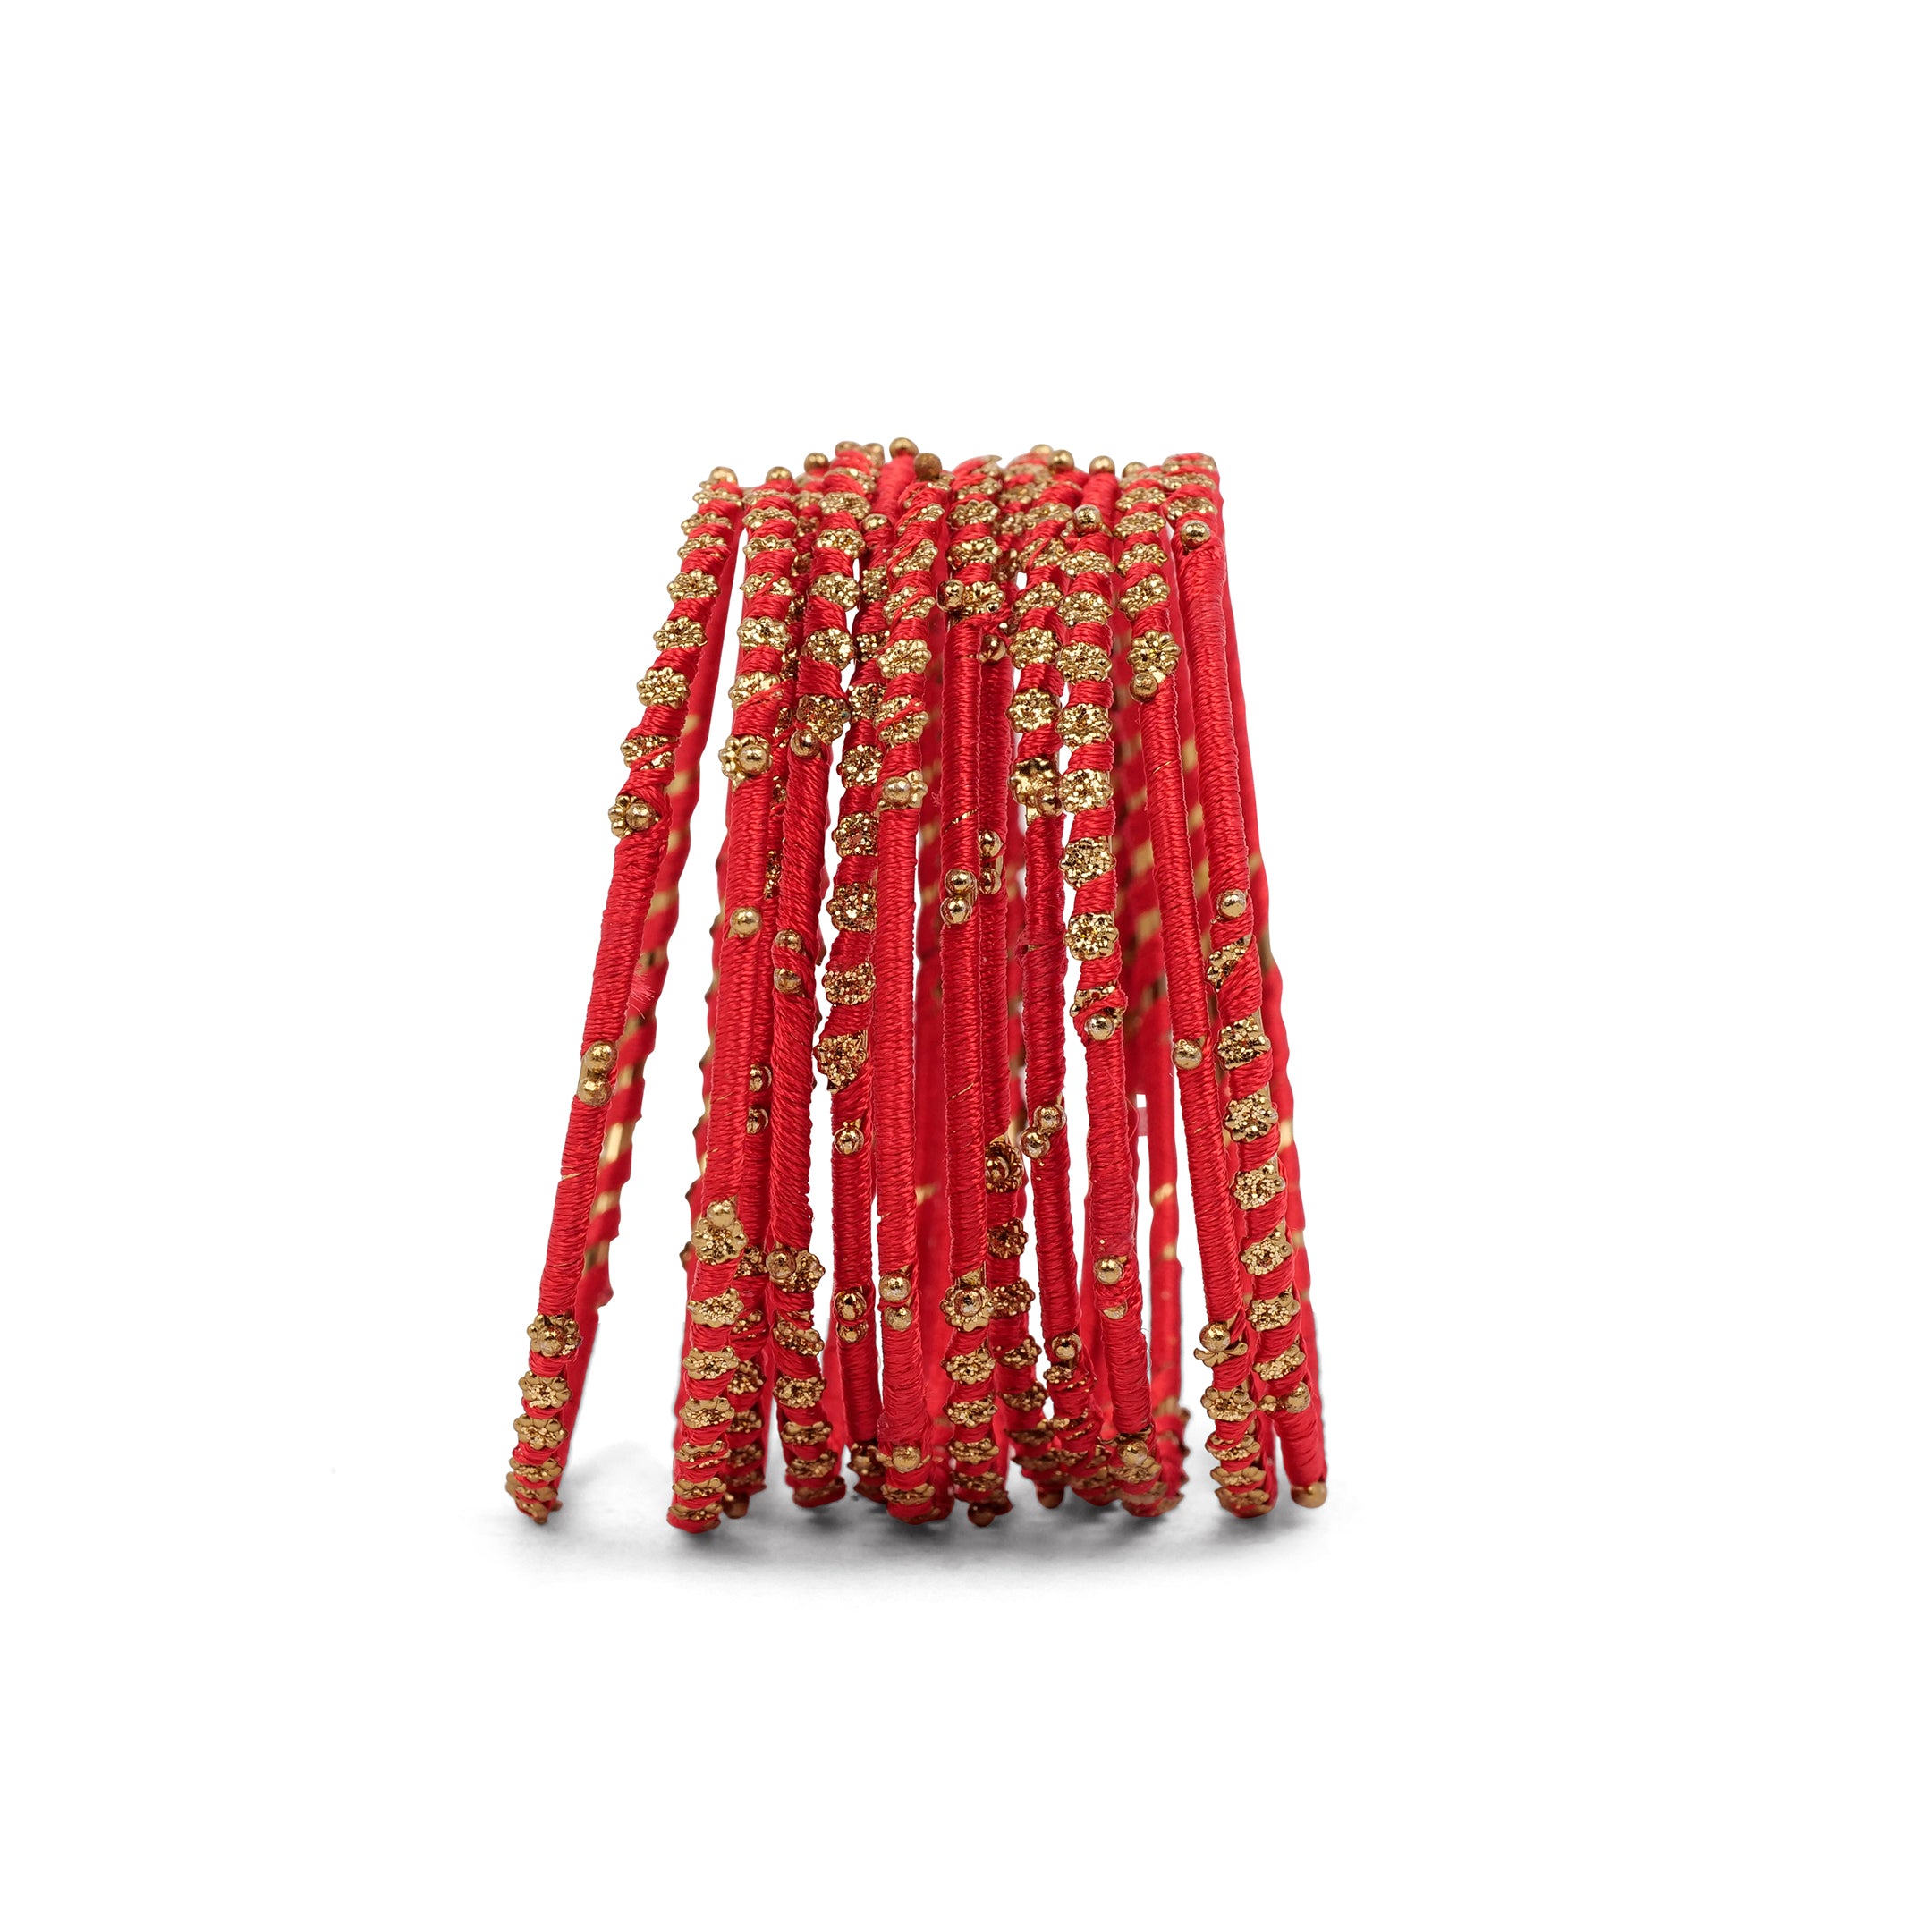 Set of 12 Floral Thread Bangles in Red